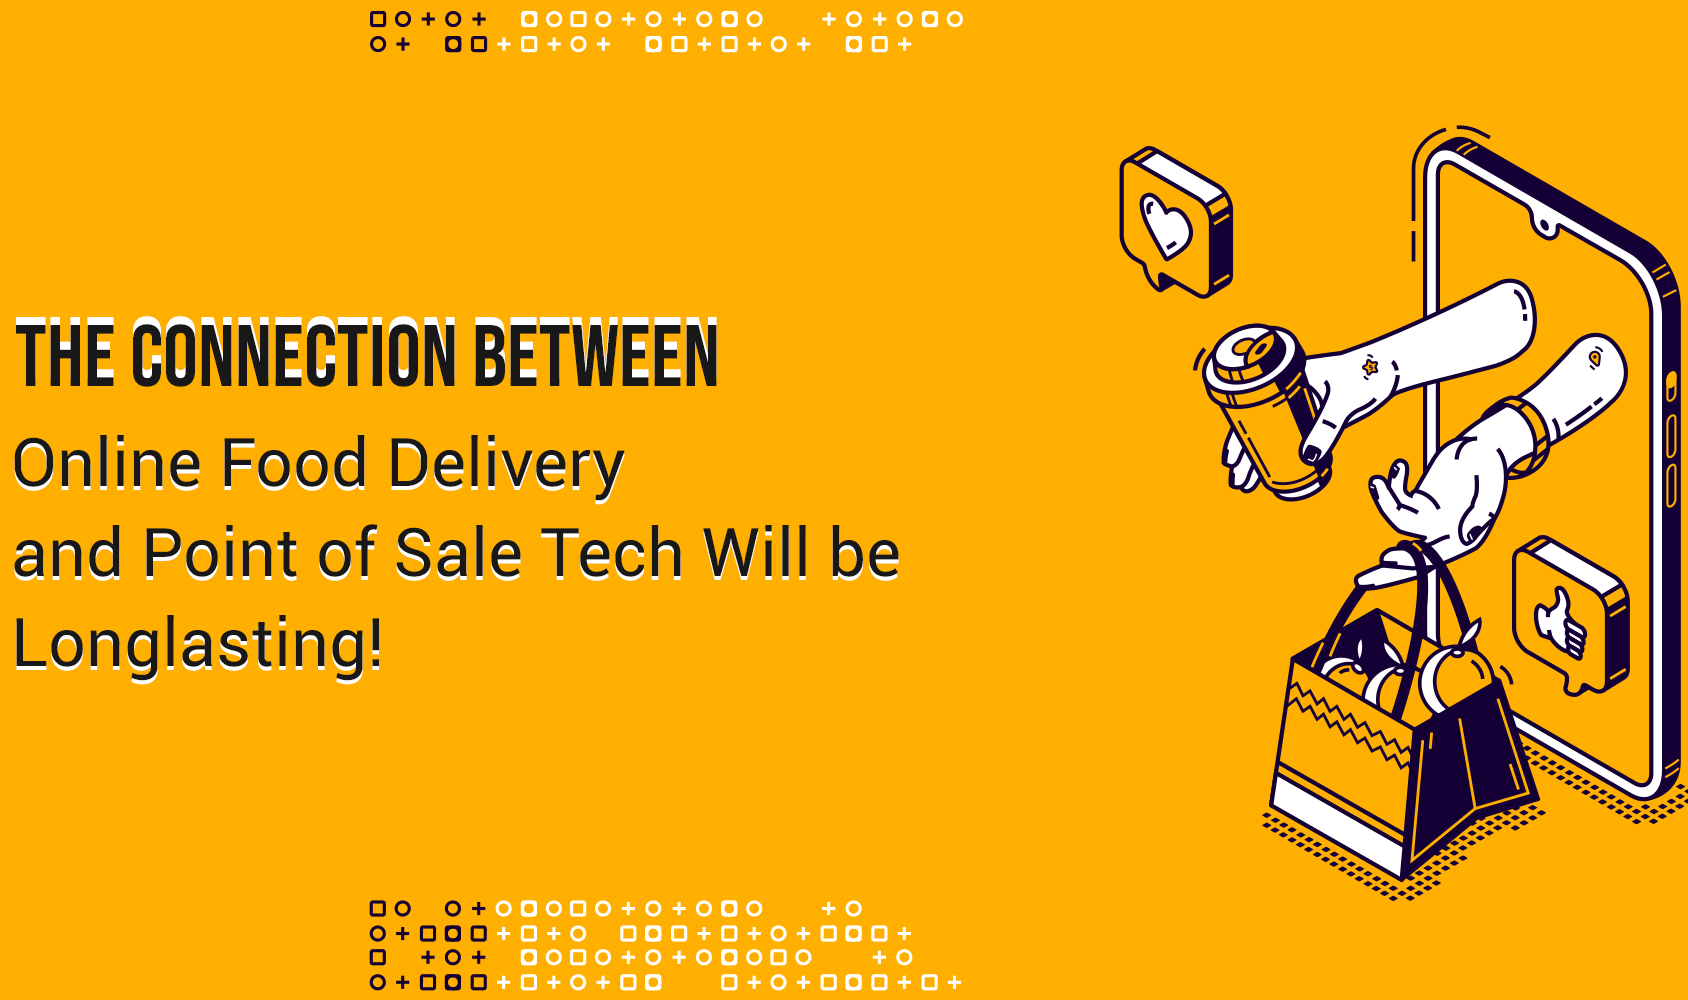 The Connection Between Online Food Delivery and Point of Sale Tech Will be Long-Lasting!